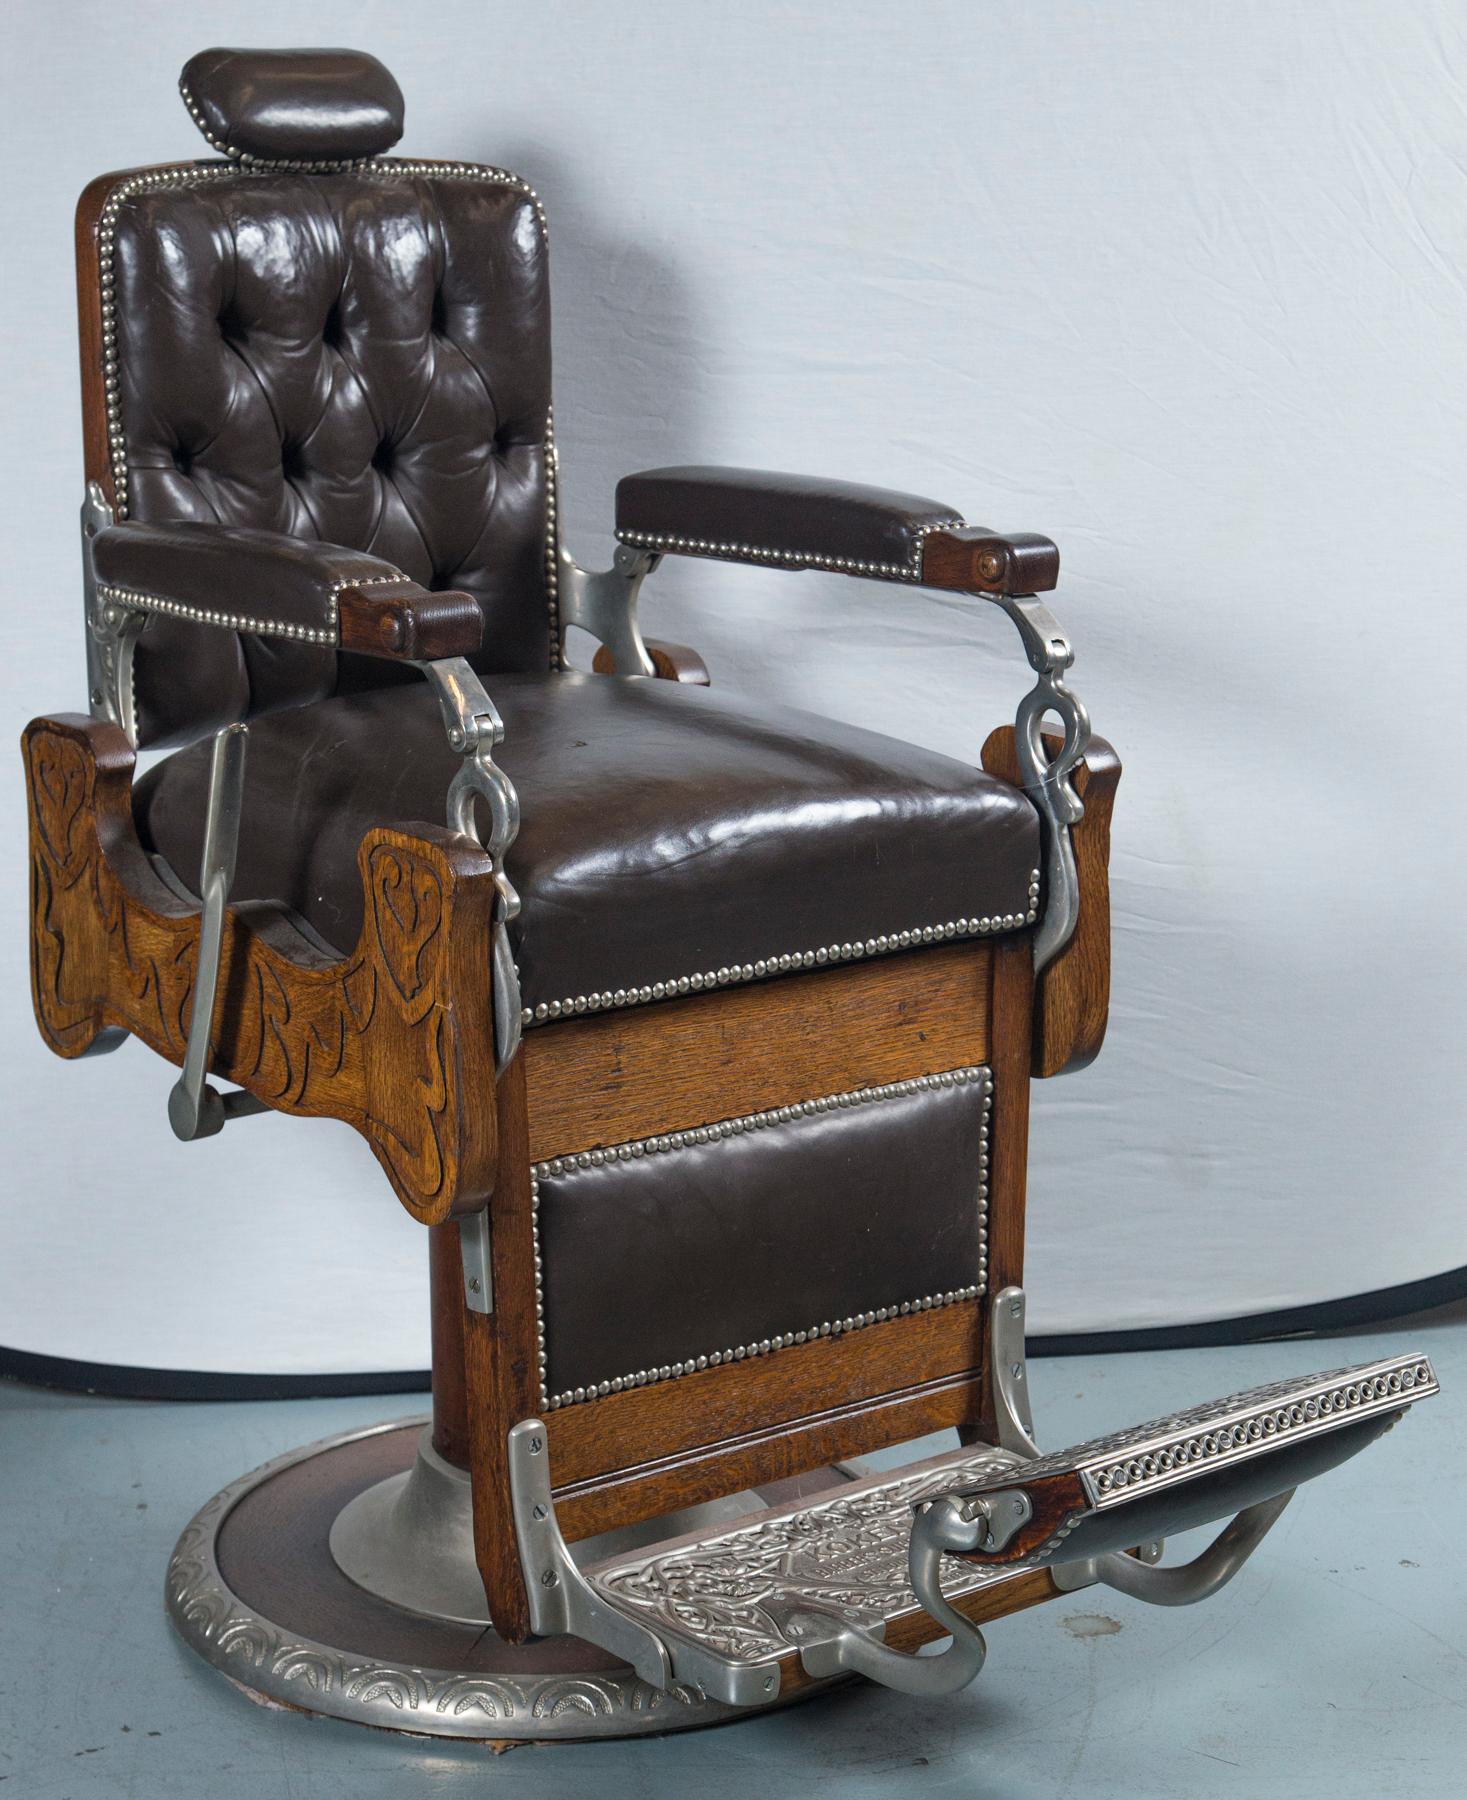 Vintage Koken Barber's Chair 1890 ca signed Koken Barbers' Supply St. Louis, Mo 1